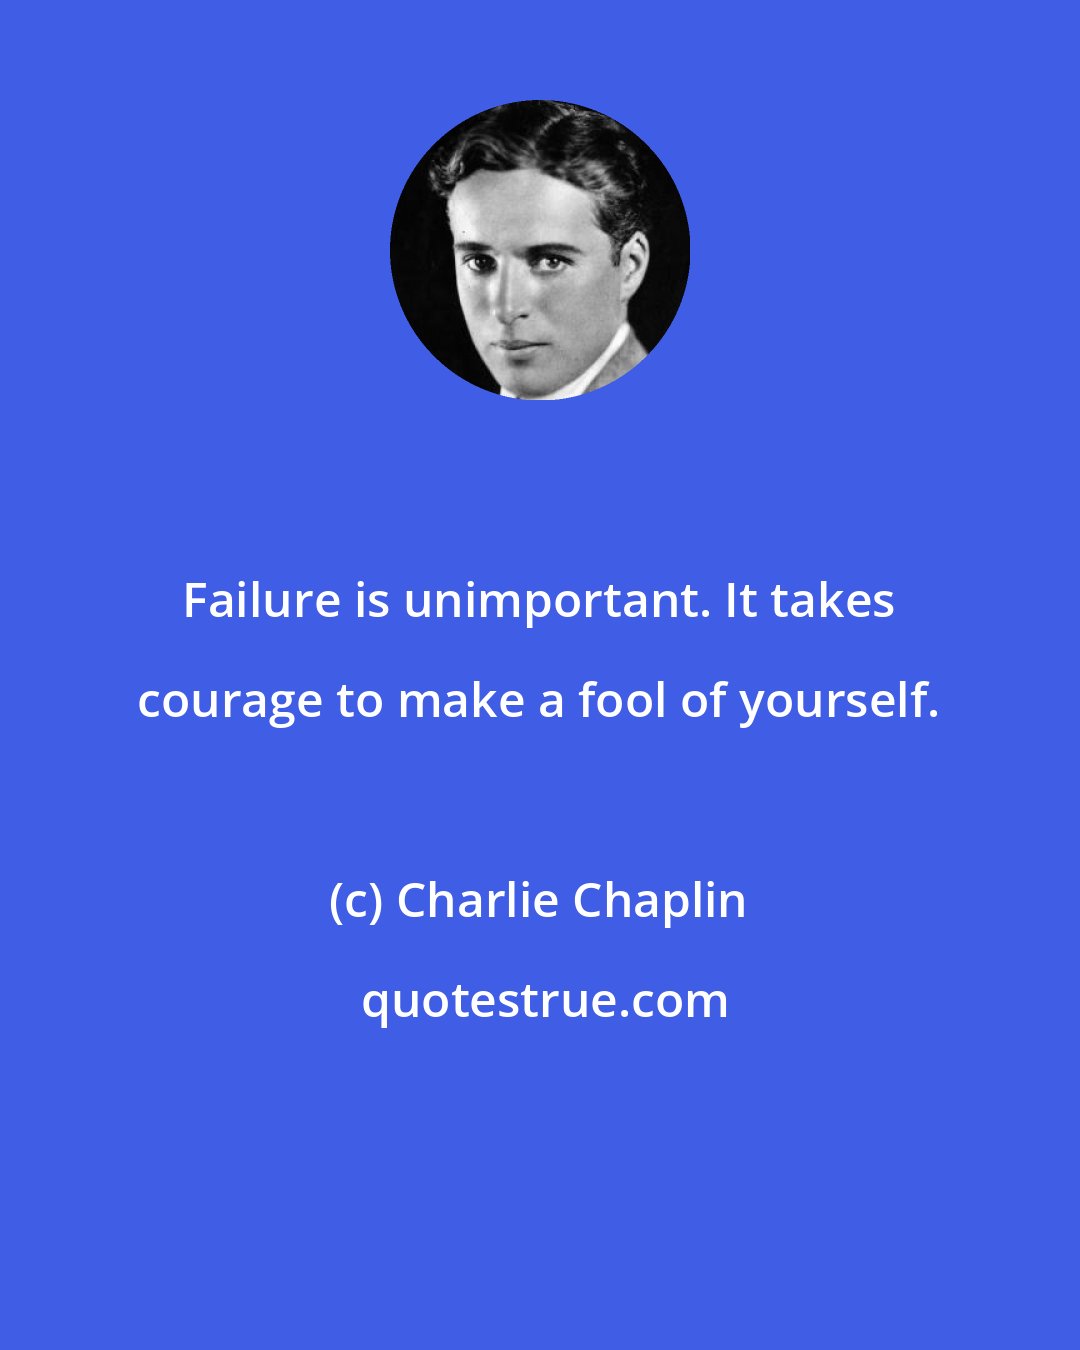 Charlie Chaplin: Failure is unimportant. It takes courage to make a fool of yourself.